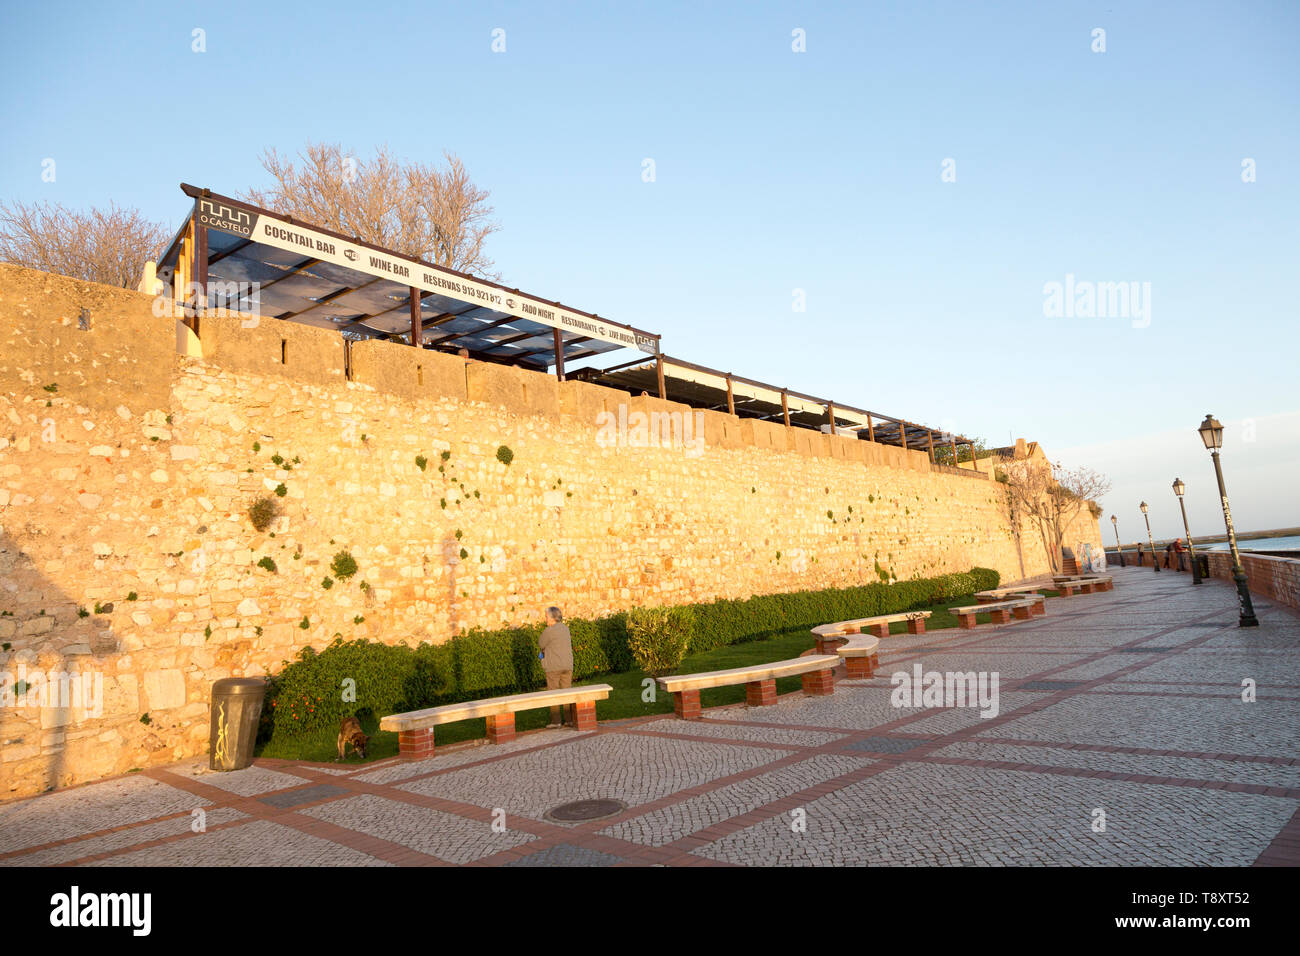 City walls of fortified medieval old town, Cidade Velha, from the waterfront city of Faro, Portugal, Europe, Stock Photo